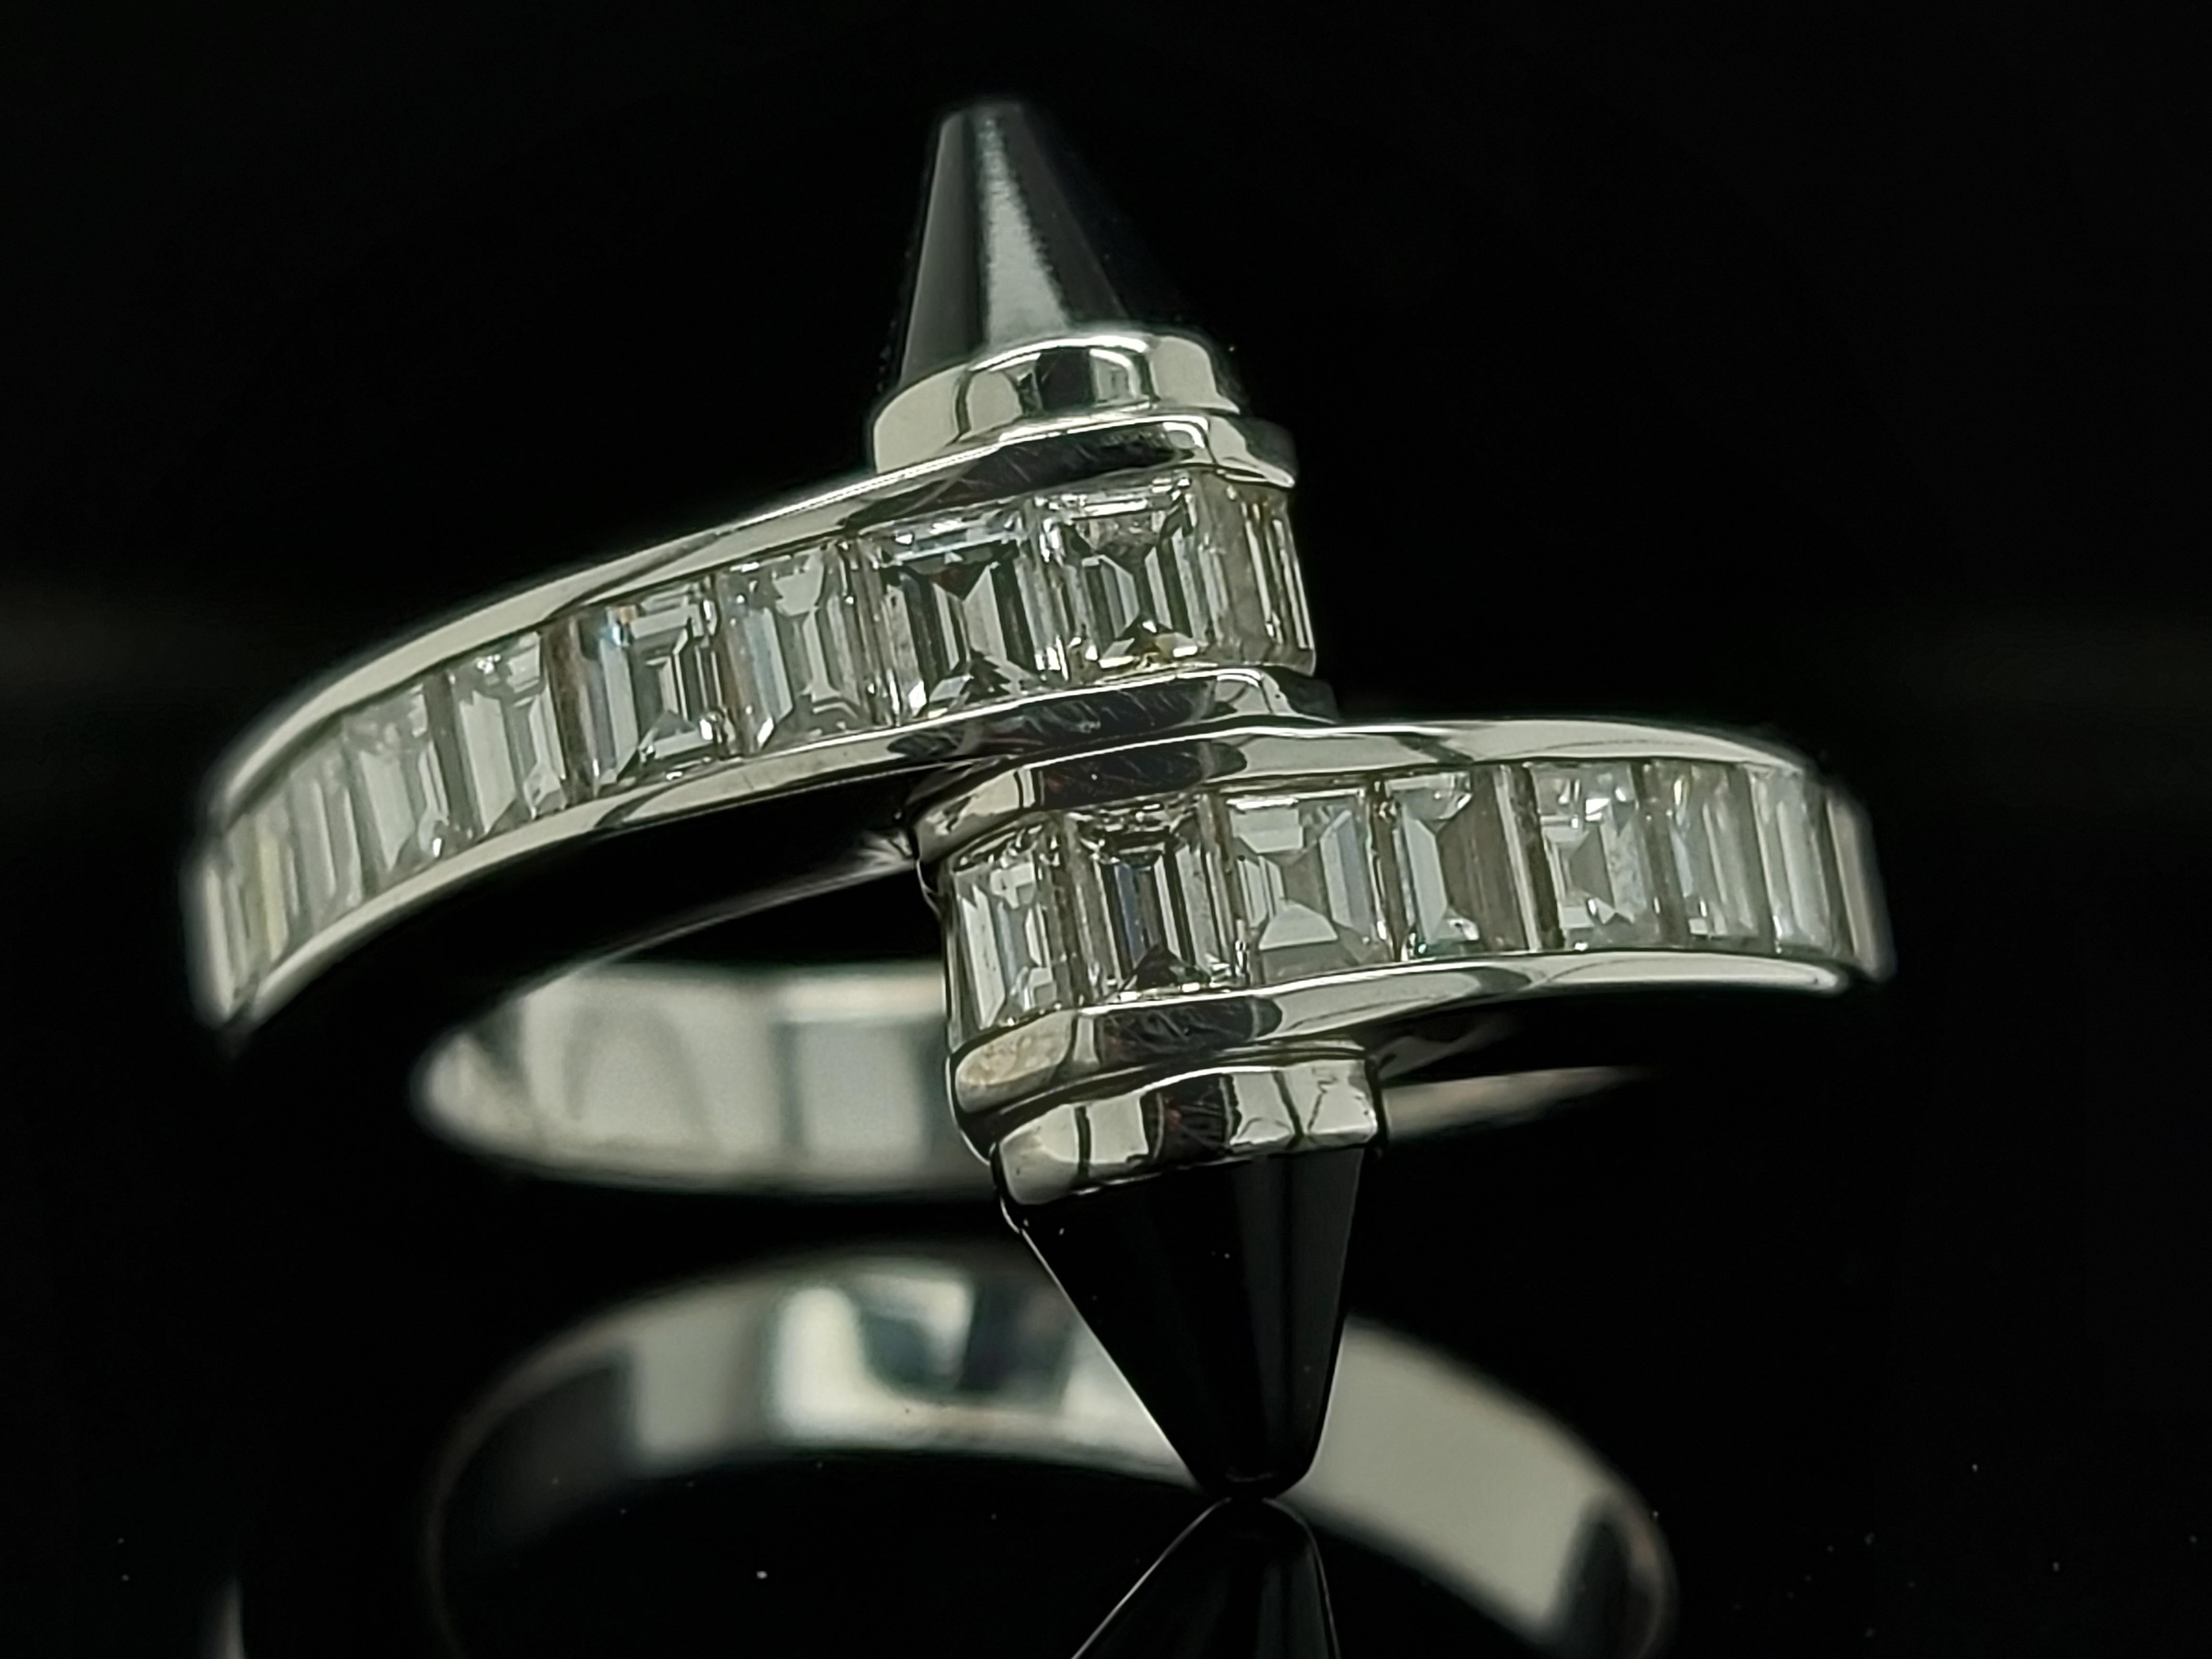 Rare and elegant 18kt white gold Cartier Menotte Baguette Diamond and Onyx Ring.

Bypass diamond ring from the Cartier Menotte Collection. 
Signed and numbered Cartier 750. Designed as a screw motif set with diamonds accented by cabochon onyx